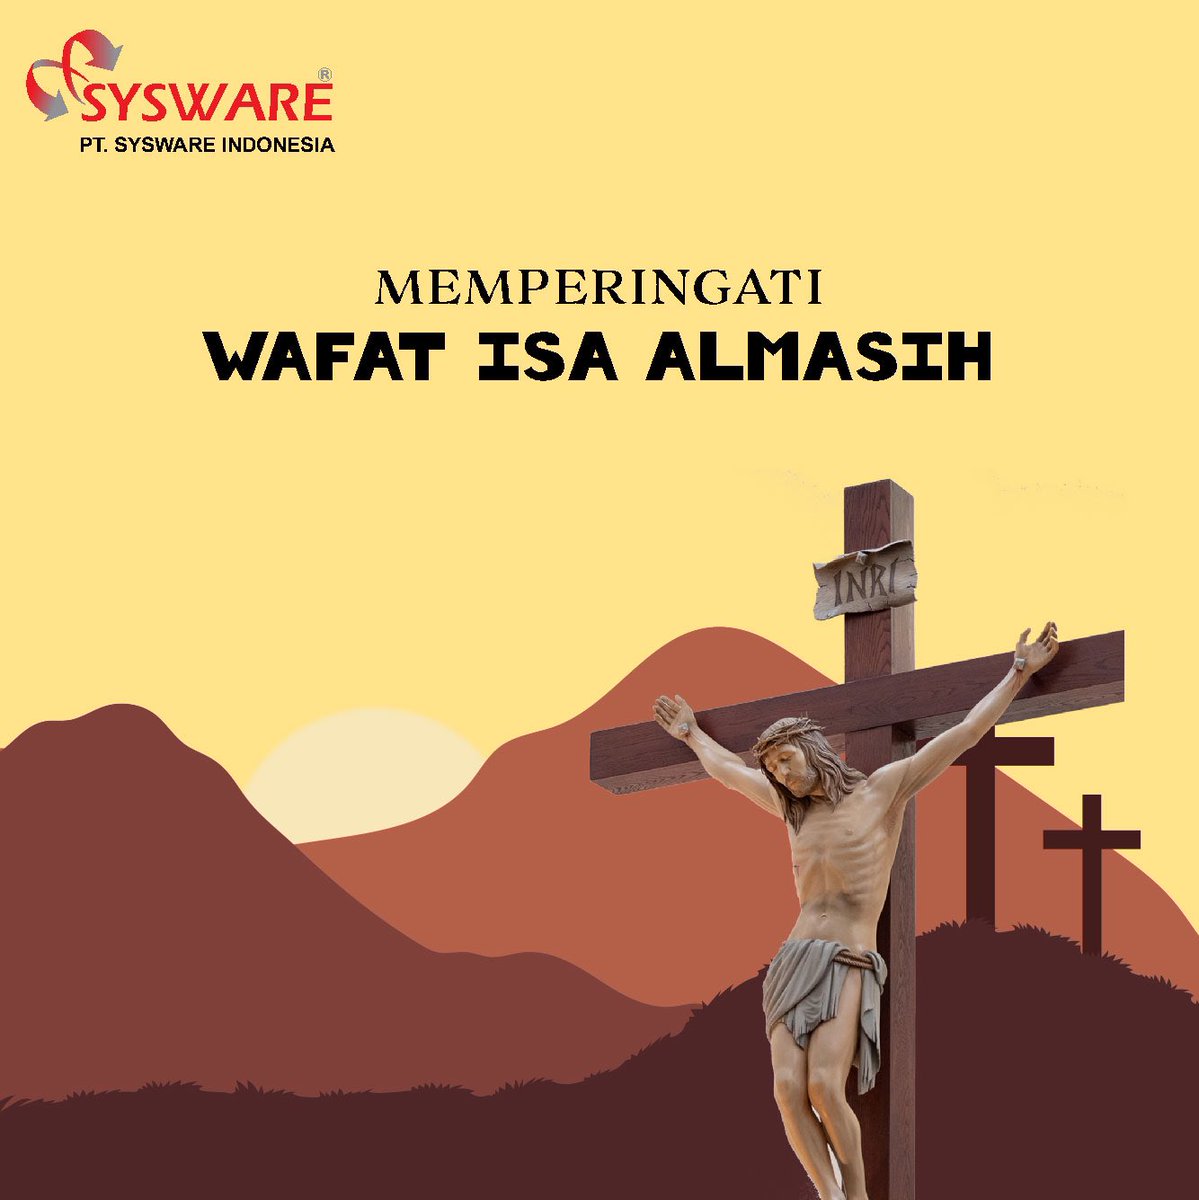 May we all be blessed on this holy Good Friday.
.
.
.
#jumatagung #goodfriday #christ #syswareindonesia